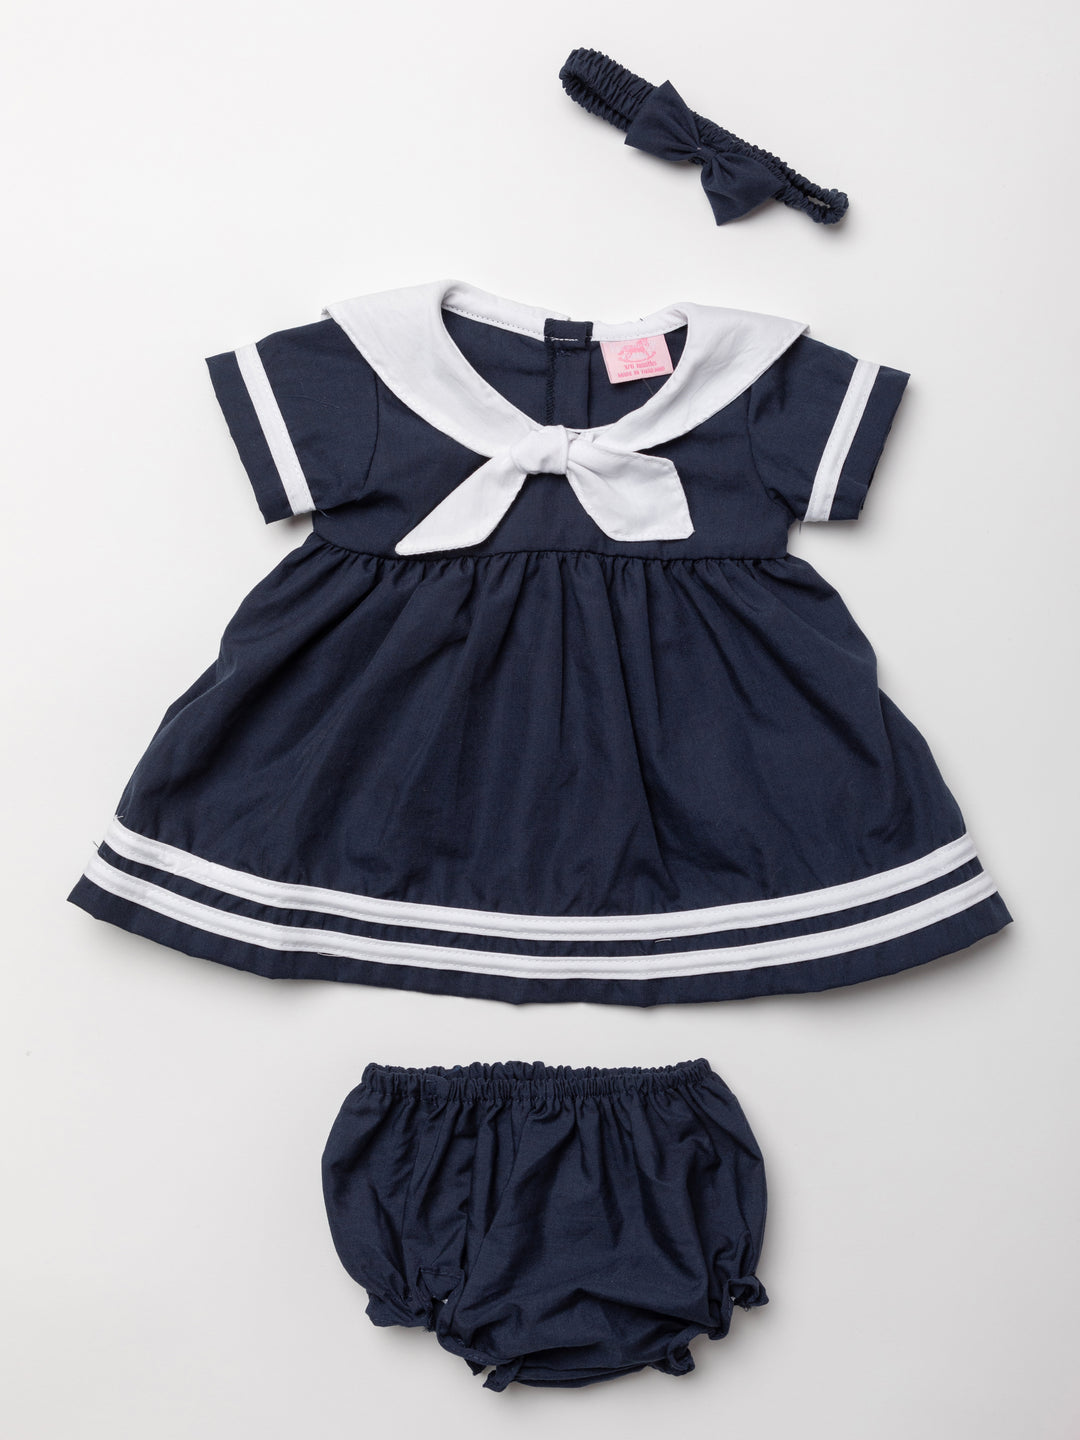 Imp Girtls Cotton Frock With Hair Band #22032A (S-22)